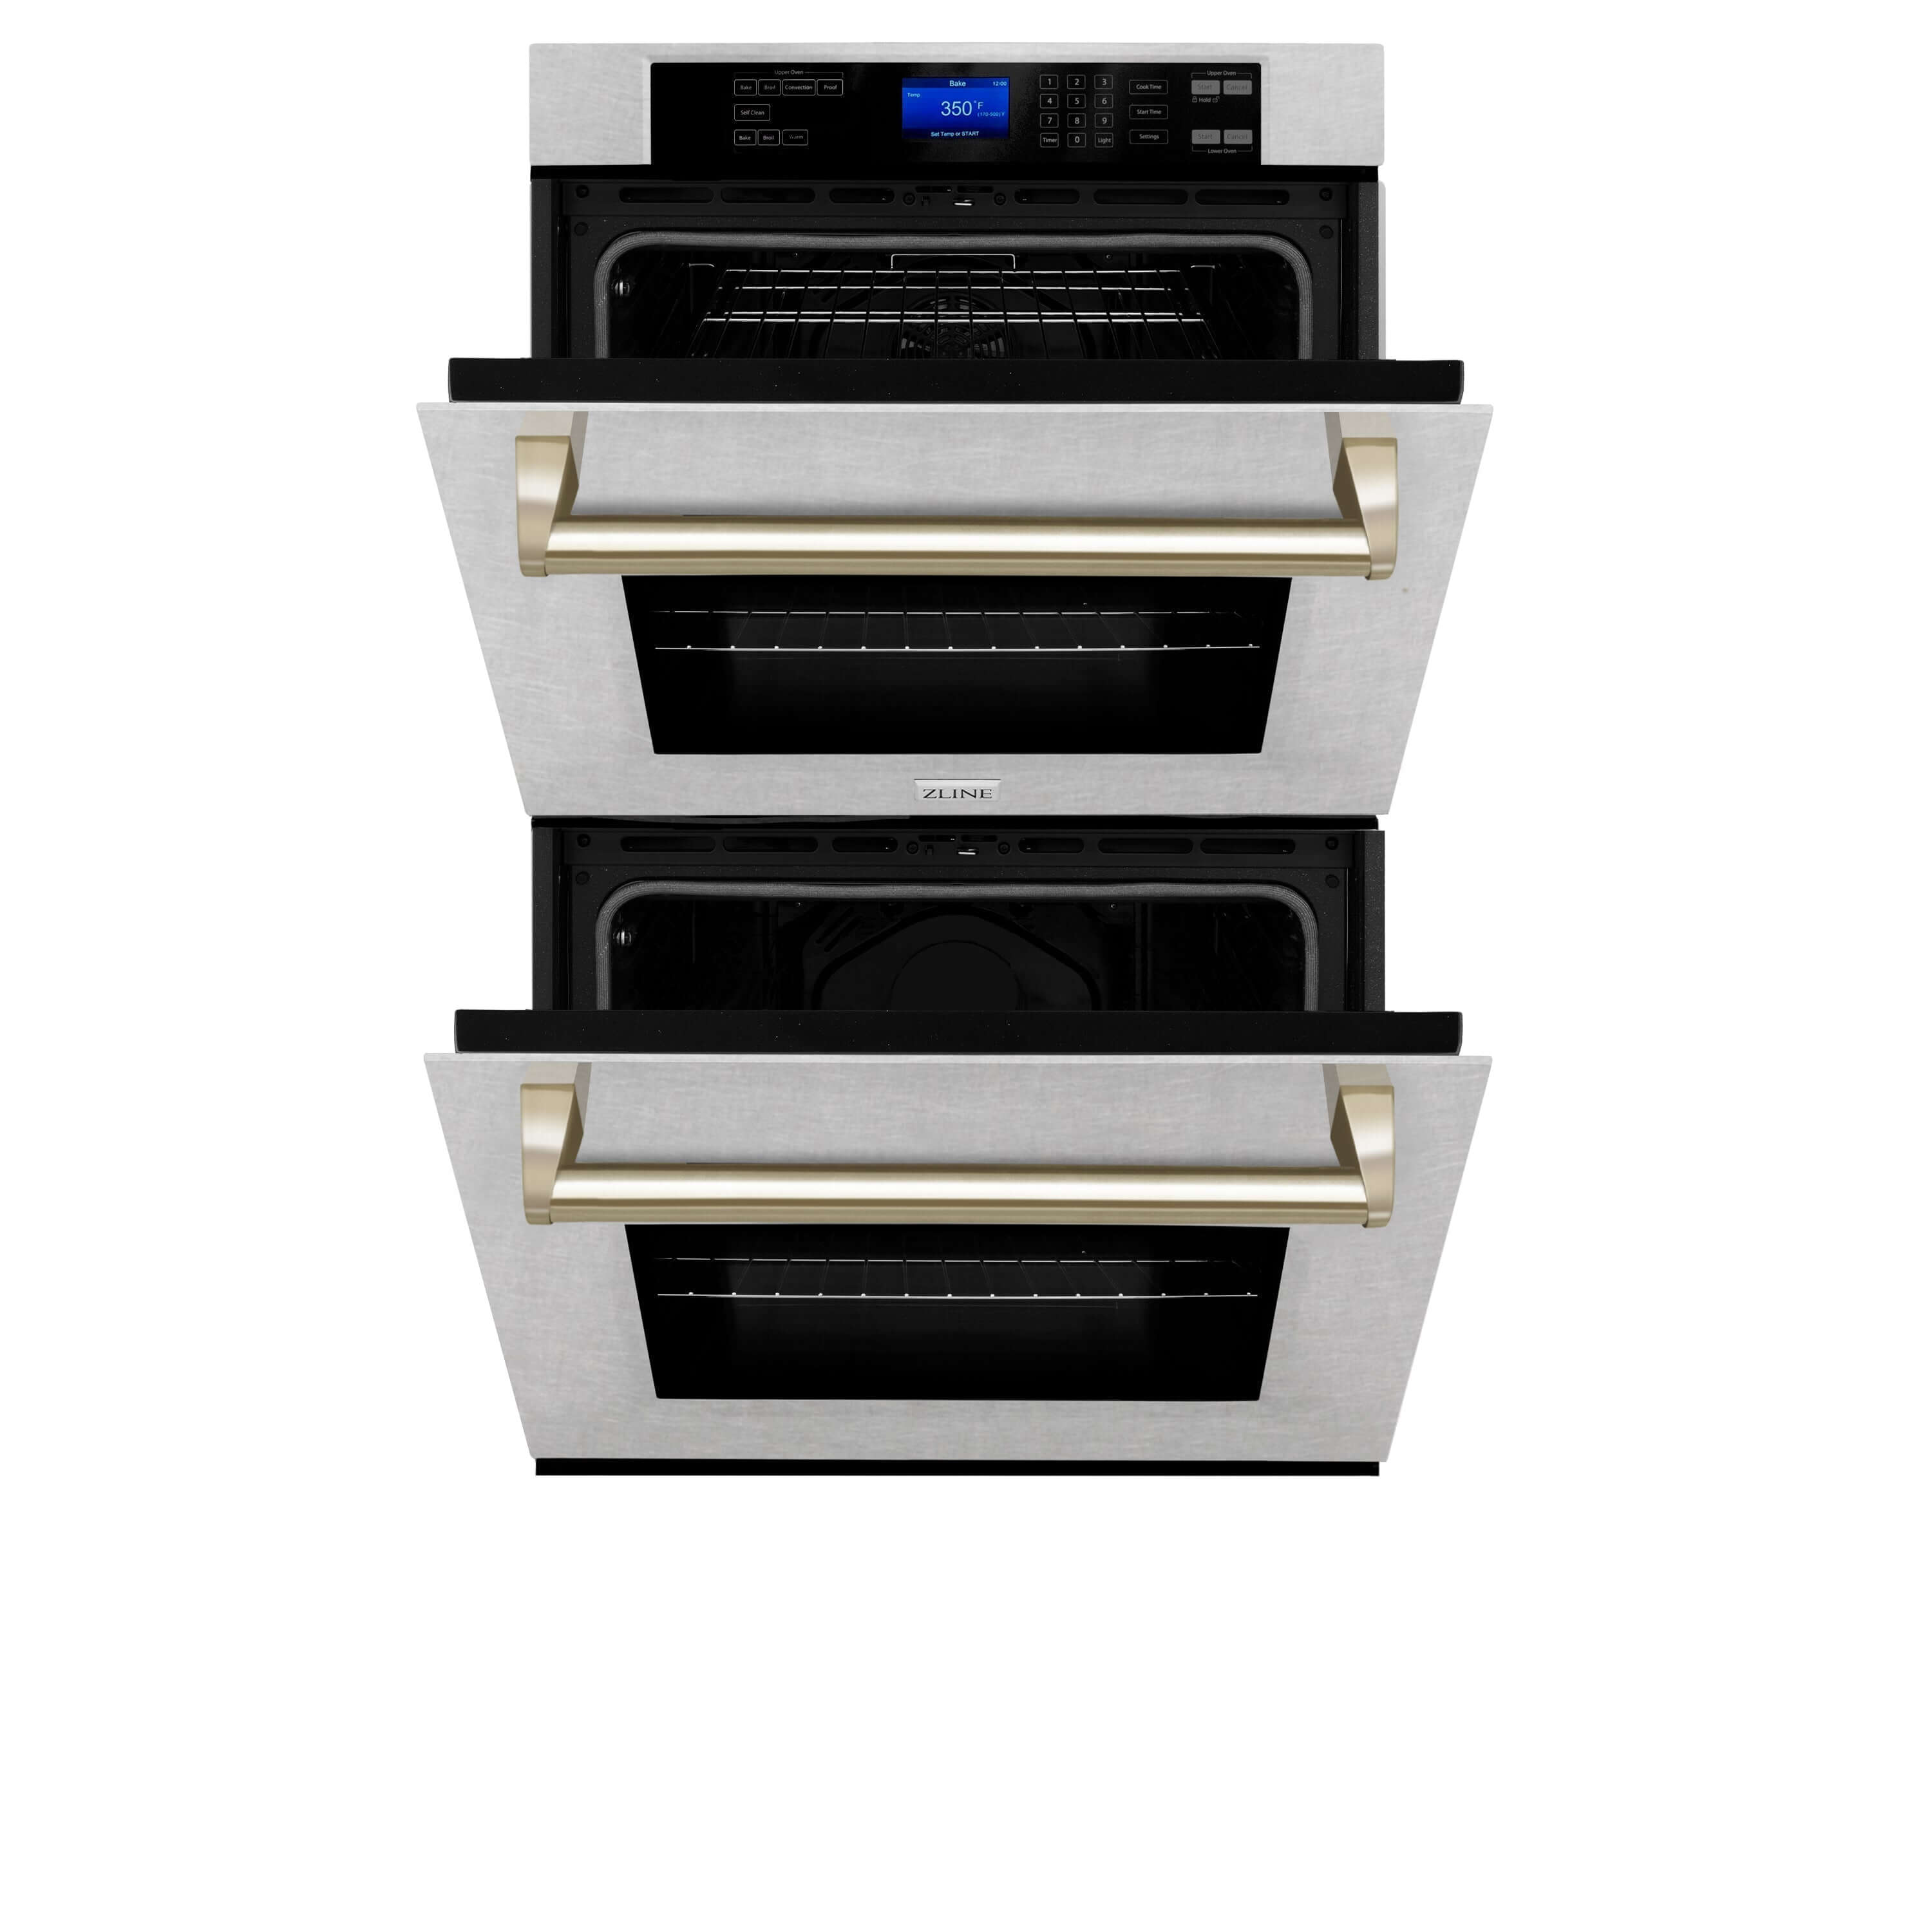 ZLINE Autograph Edition 30 in. Electric Double Wall Oven with Self Clean and True Convection in DuraSnow® Stainless Steel and Polished Gold Accents (AWDSZ-30-G) front, oven half open.